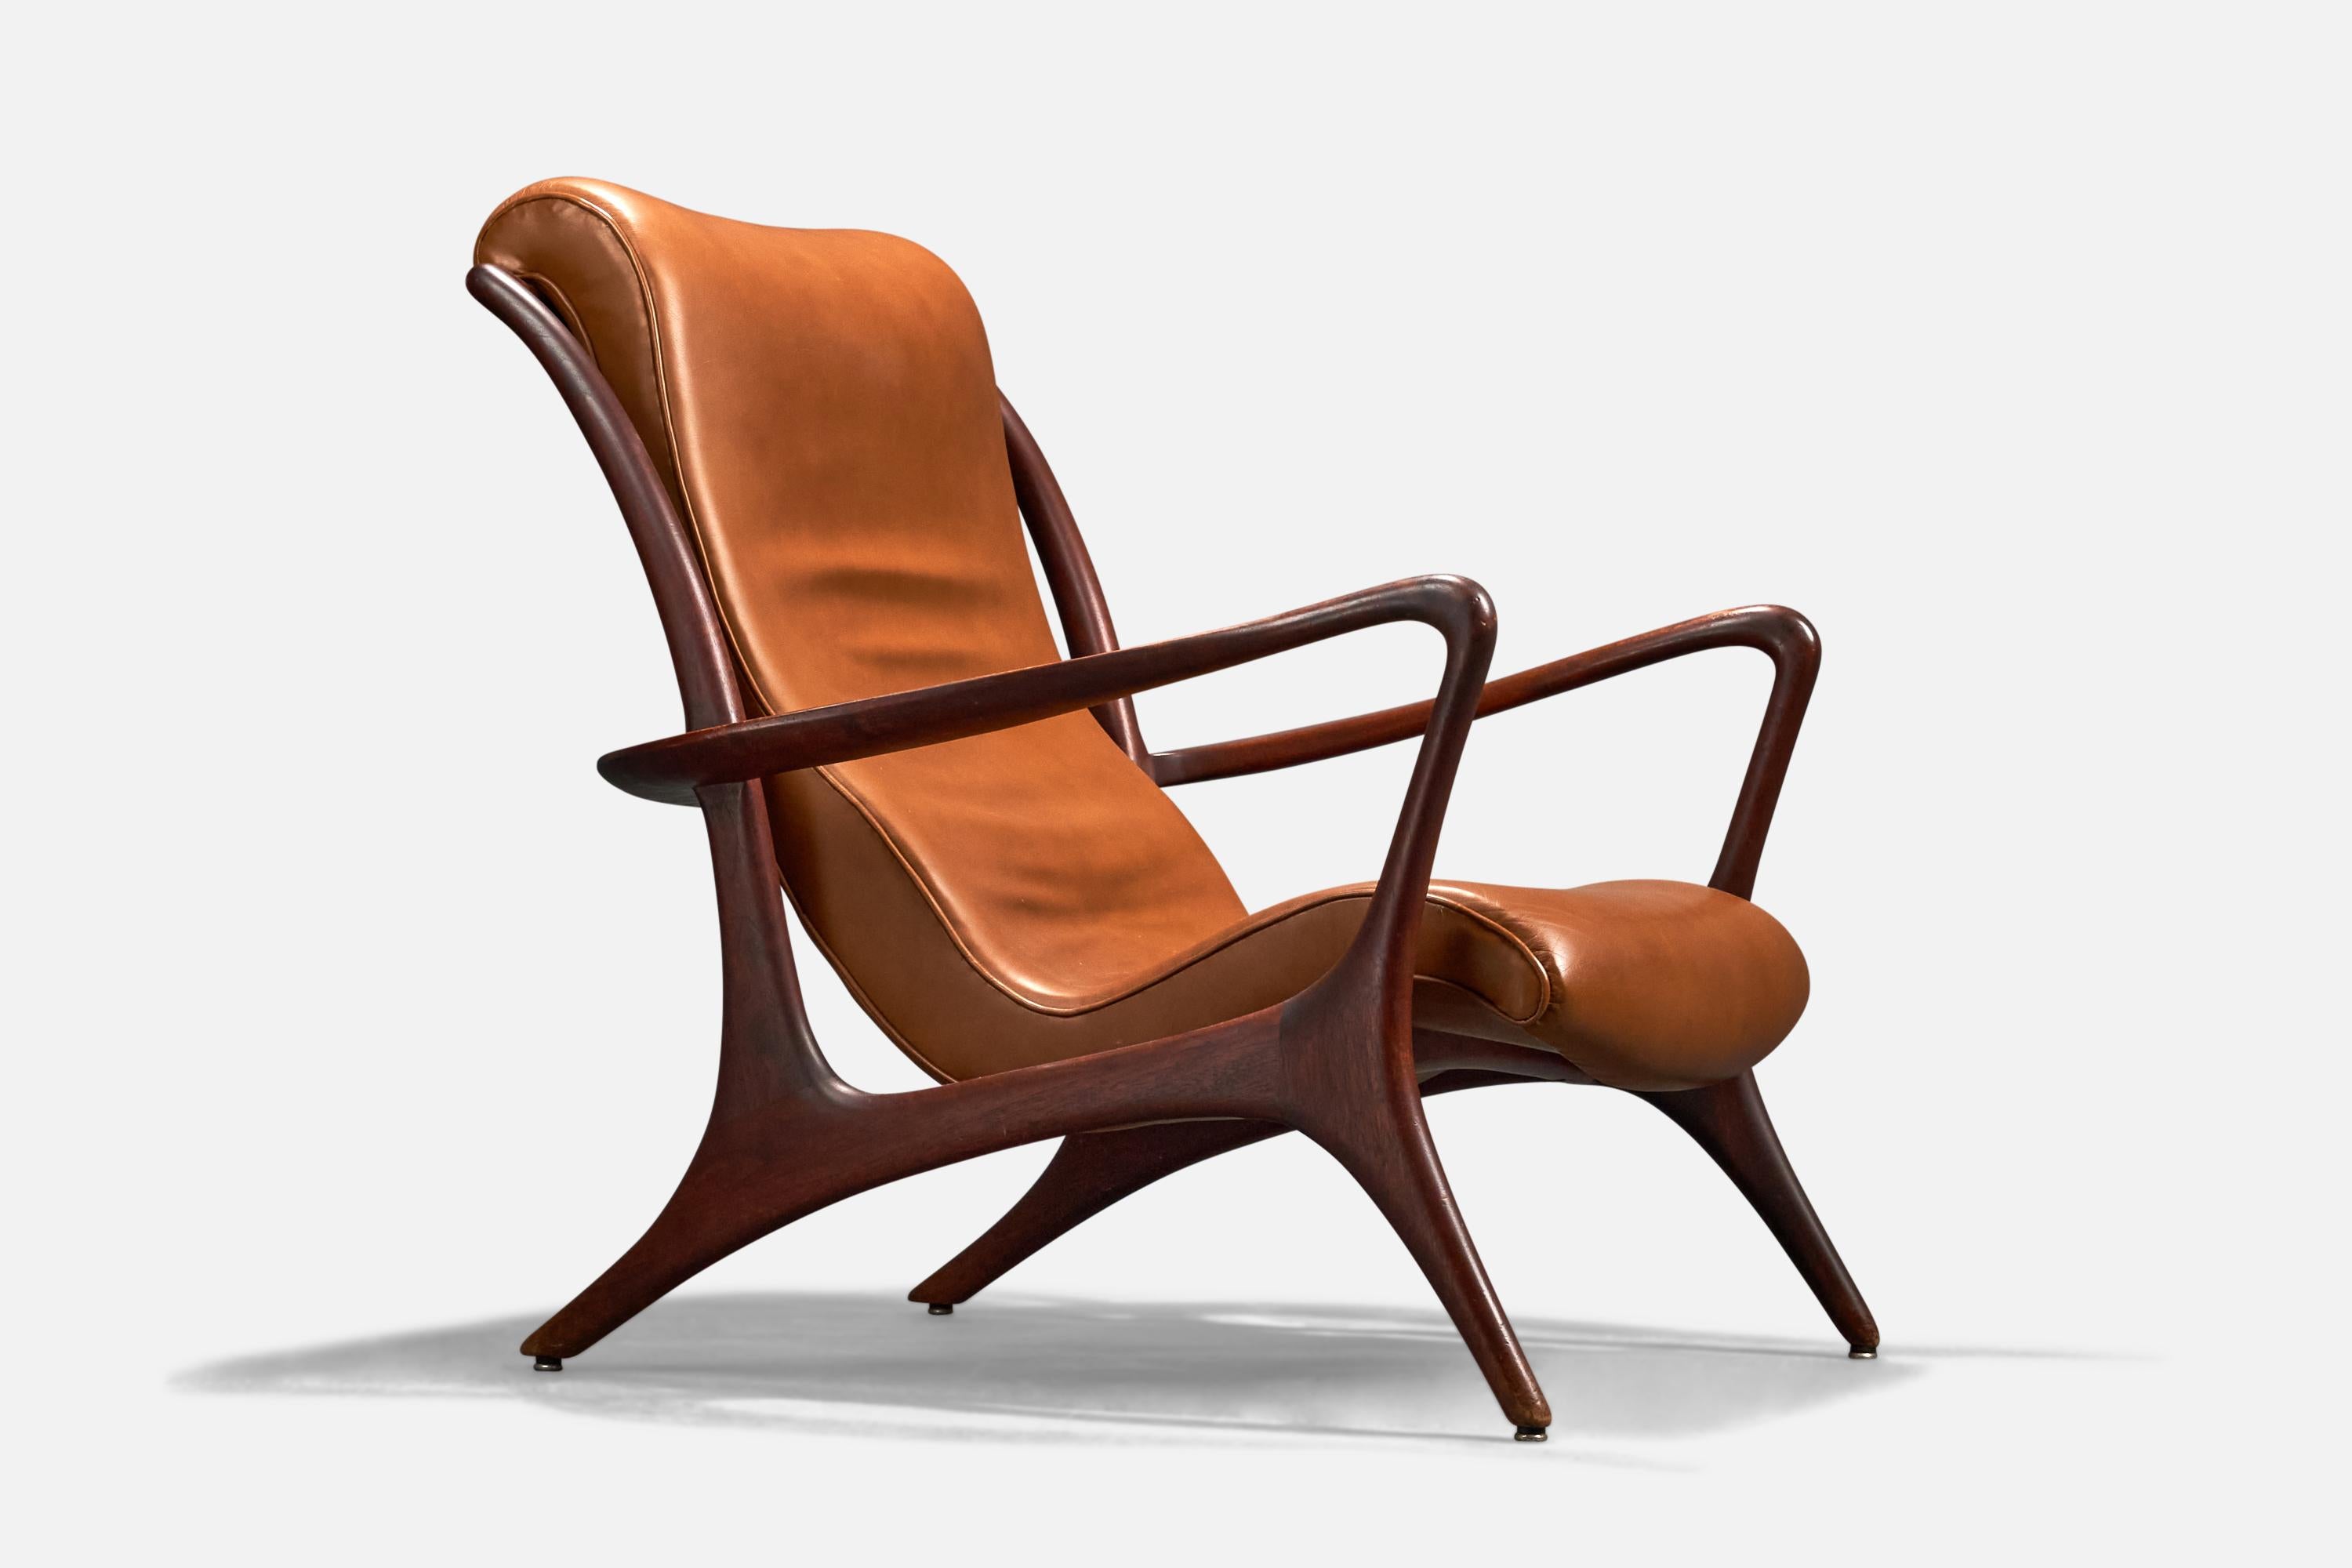 A leather and walnut lounge chair designed by Vladimir Kagan and produced by Kagan-Dreyfuss, Inc, USA, C. 1950.